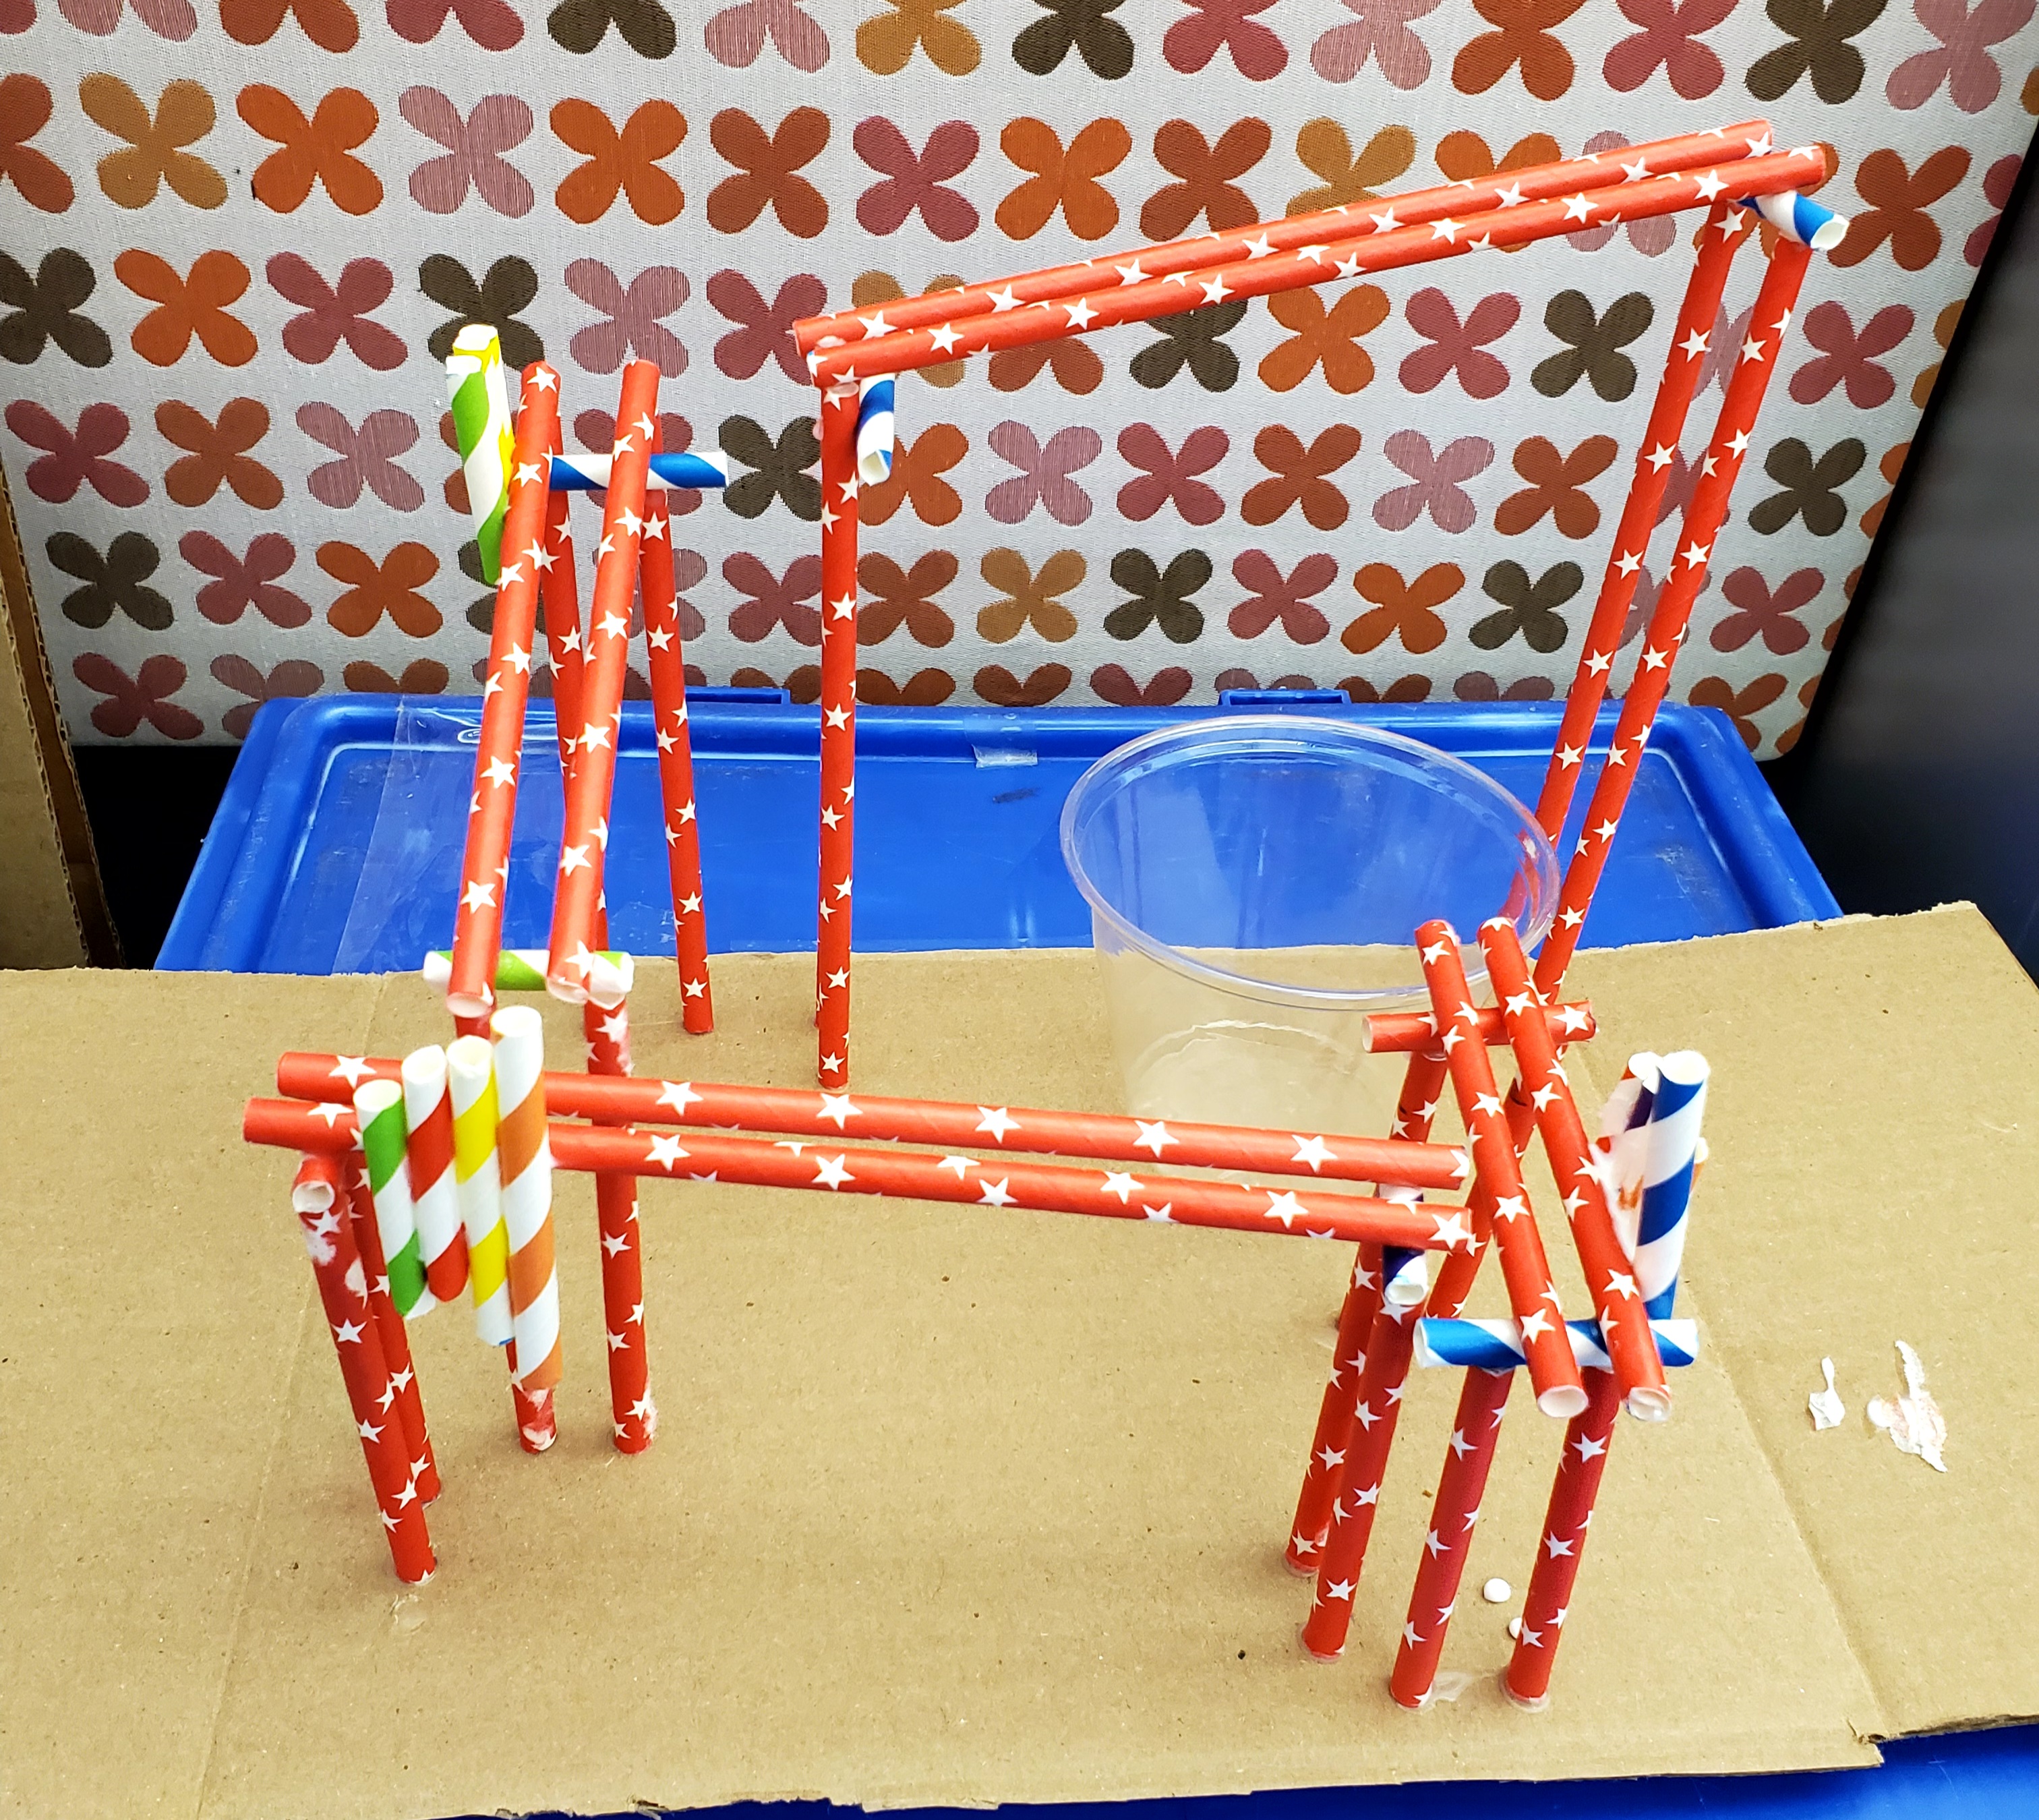 Paper straw rollercoaster made of colorful paper straws and a plastic cup all glued to a piece of cardboard sitting on top of a blue box. Behind the rollercoaster is a panel with a design of flowers in shades of orange, brown, and pink over a white background.